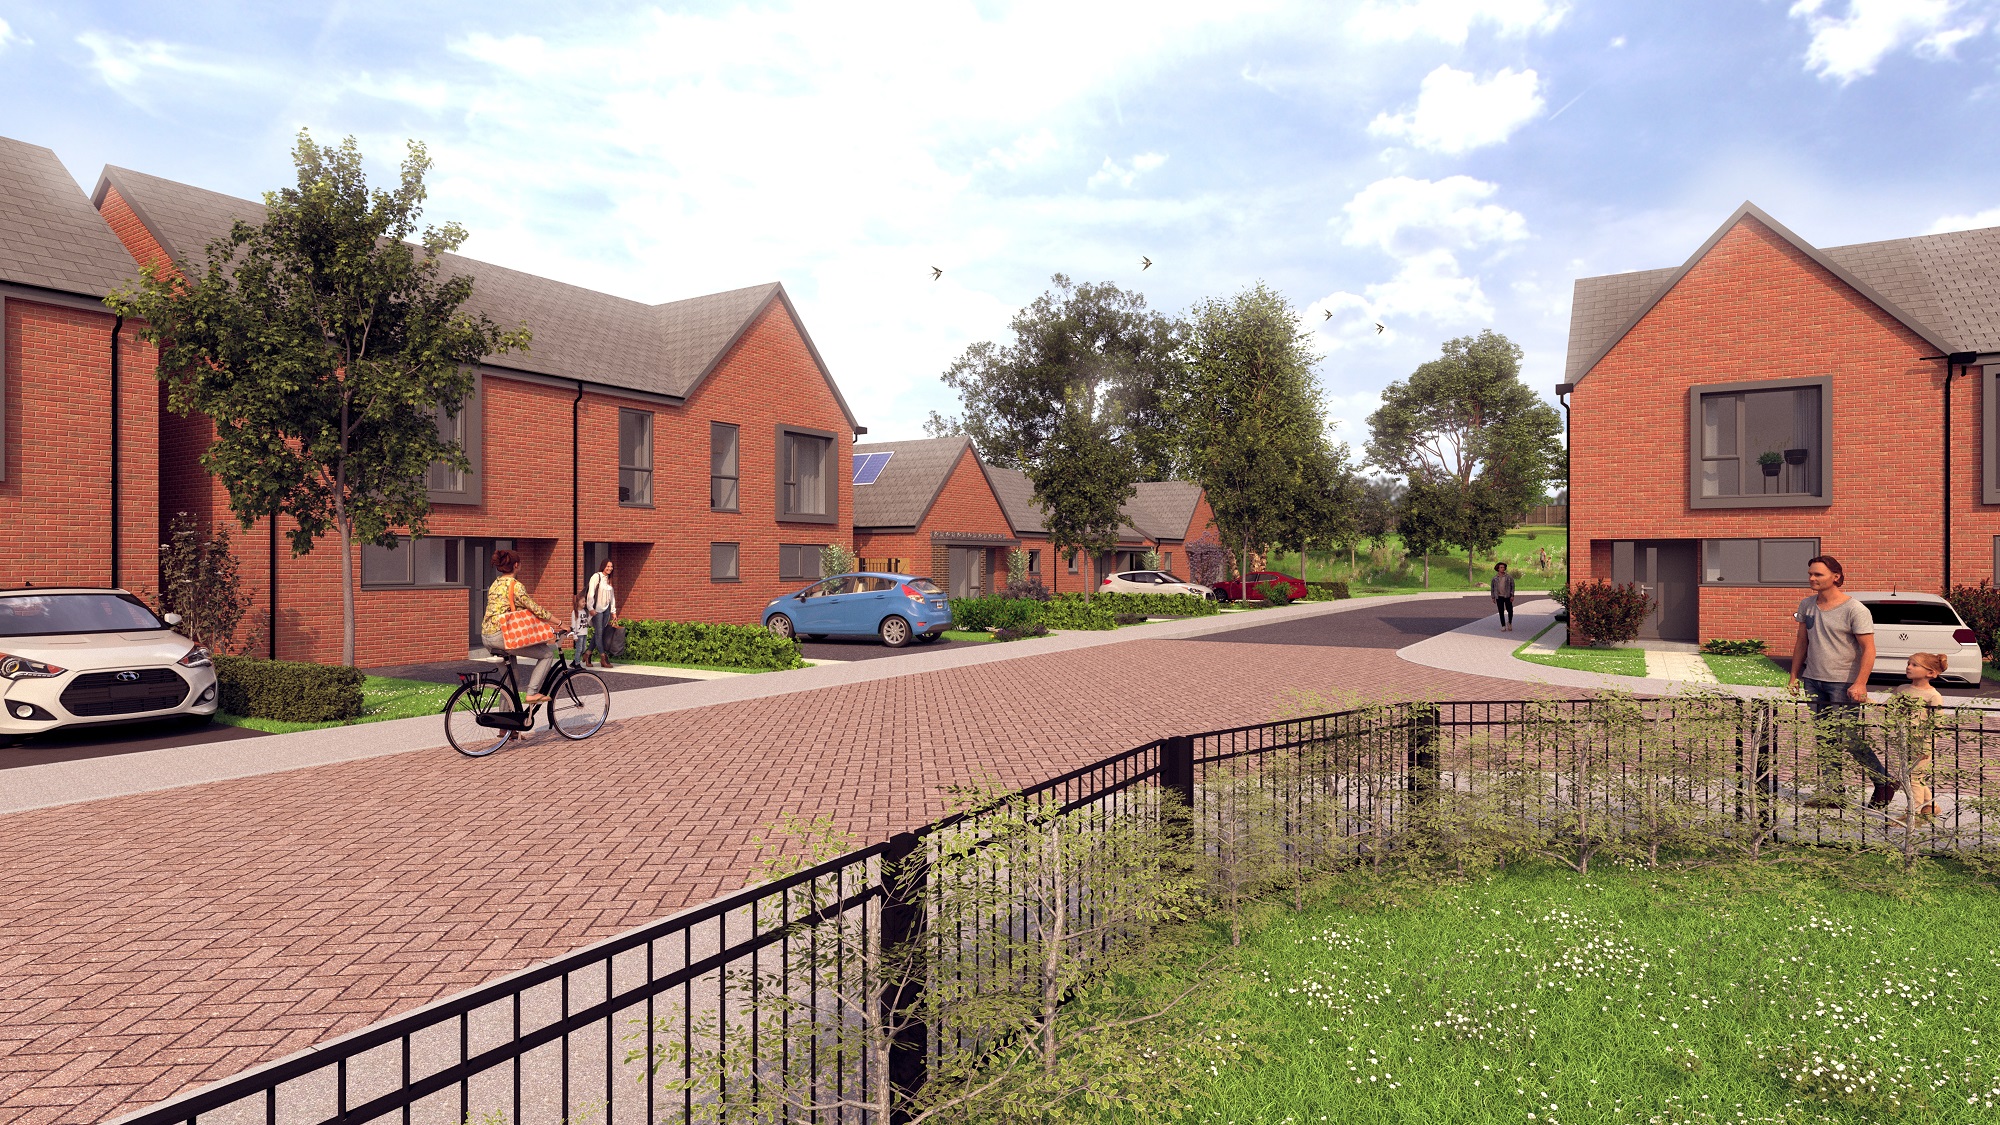 BROWNFIELD HOUSING FUND APPLICATIONS NOW OPEN FOR NEW HOMES TO BE BUILT IN SOUTH YORKSHIRE